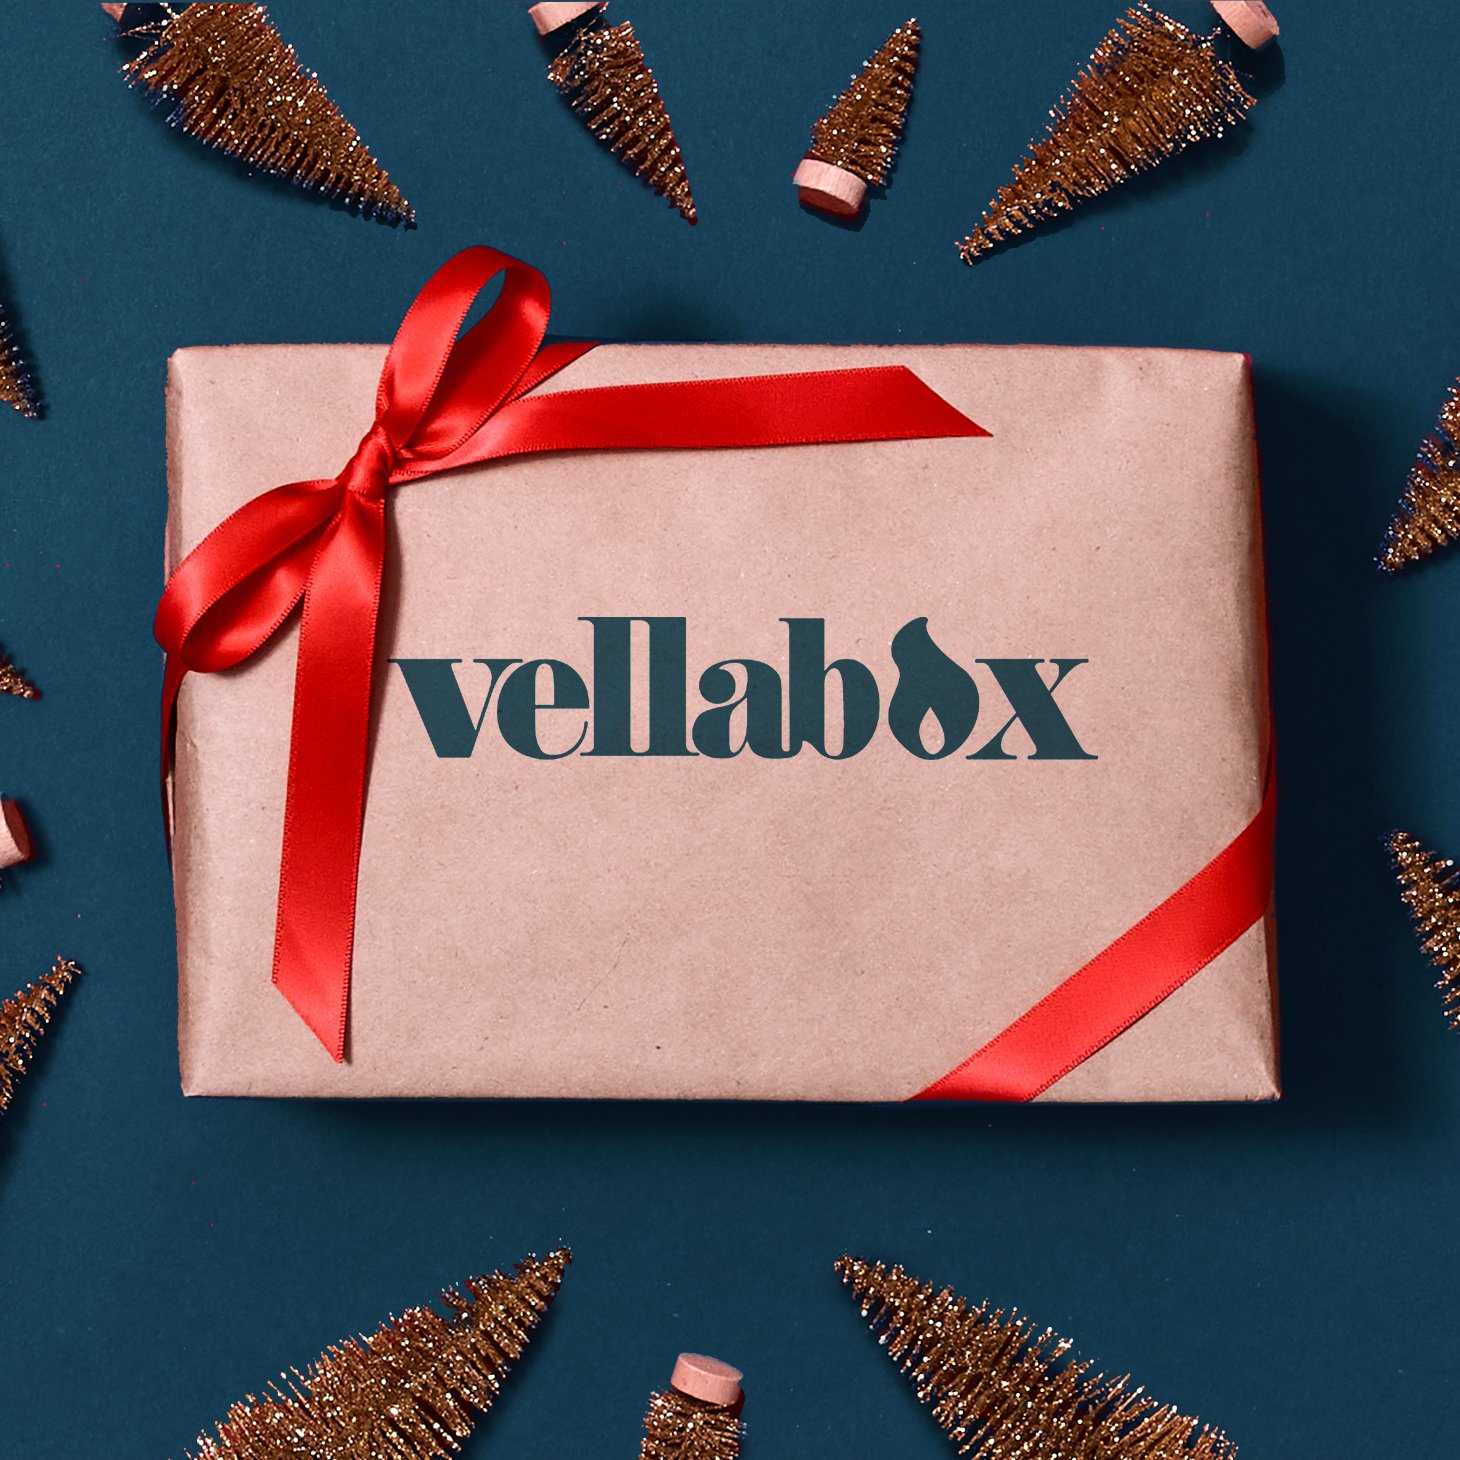 12 Days of Gratitude and Giving: Win a 6 Month Vellabox Subscription + Essentials Kit